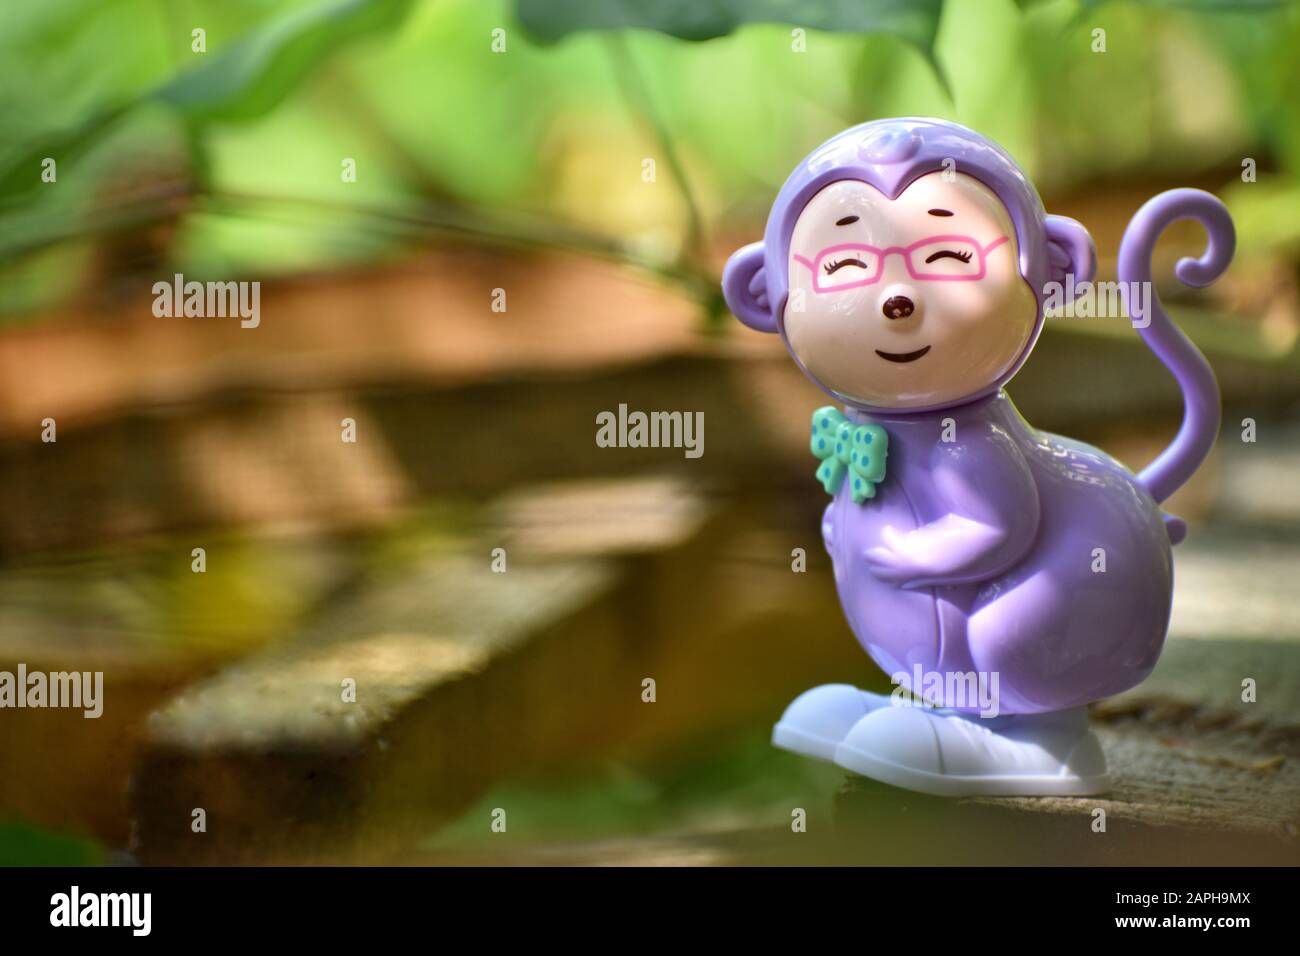 Portrait of a smiling monkey toy with greenish background and blurred leafs Stock Photo